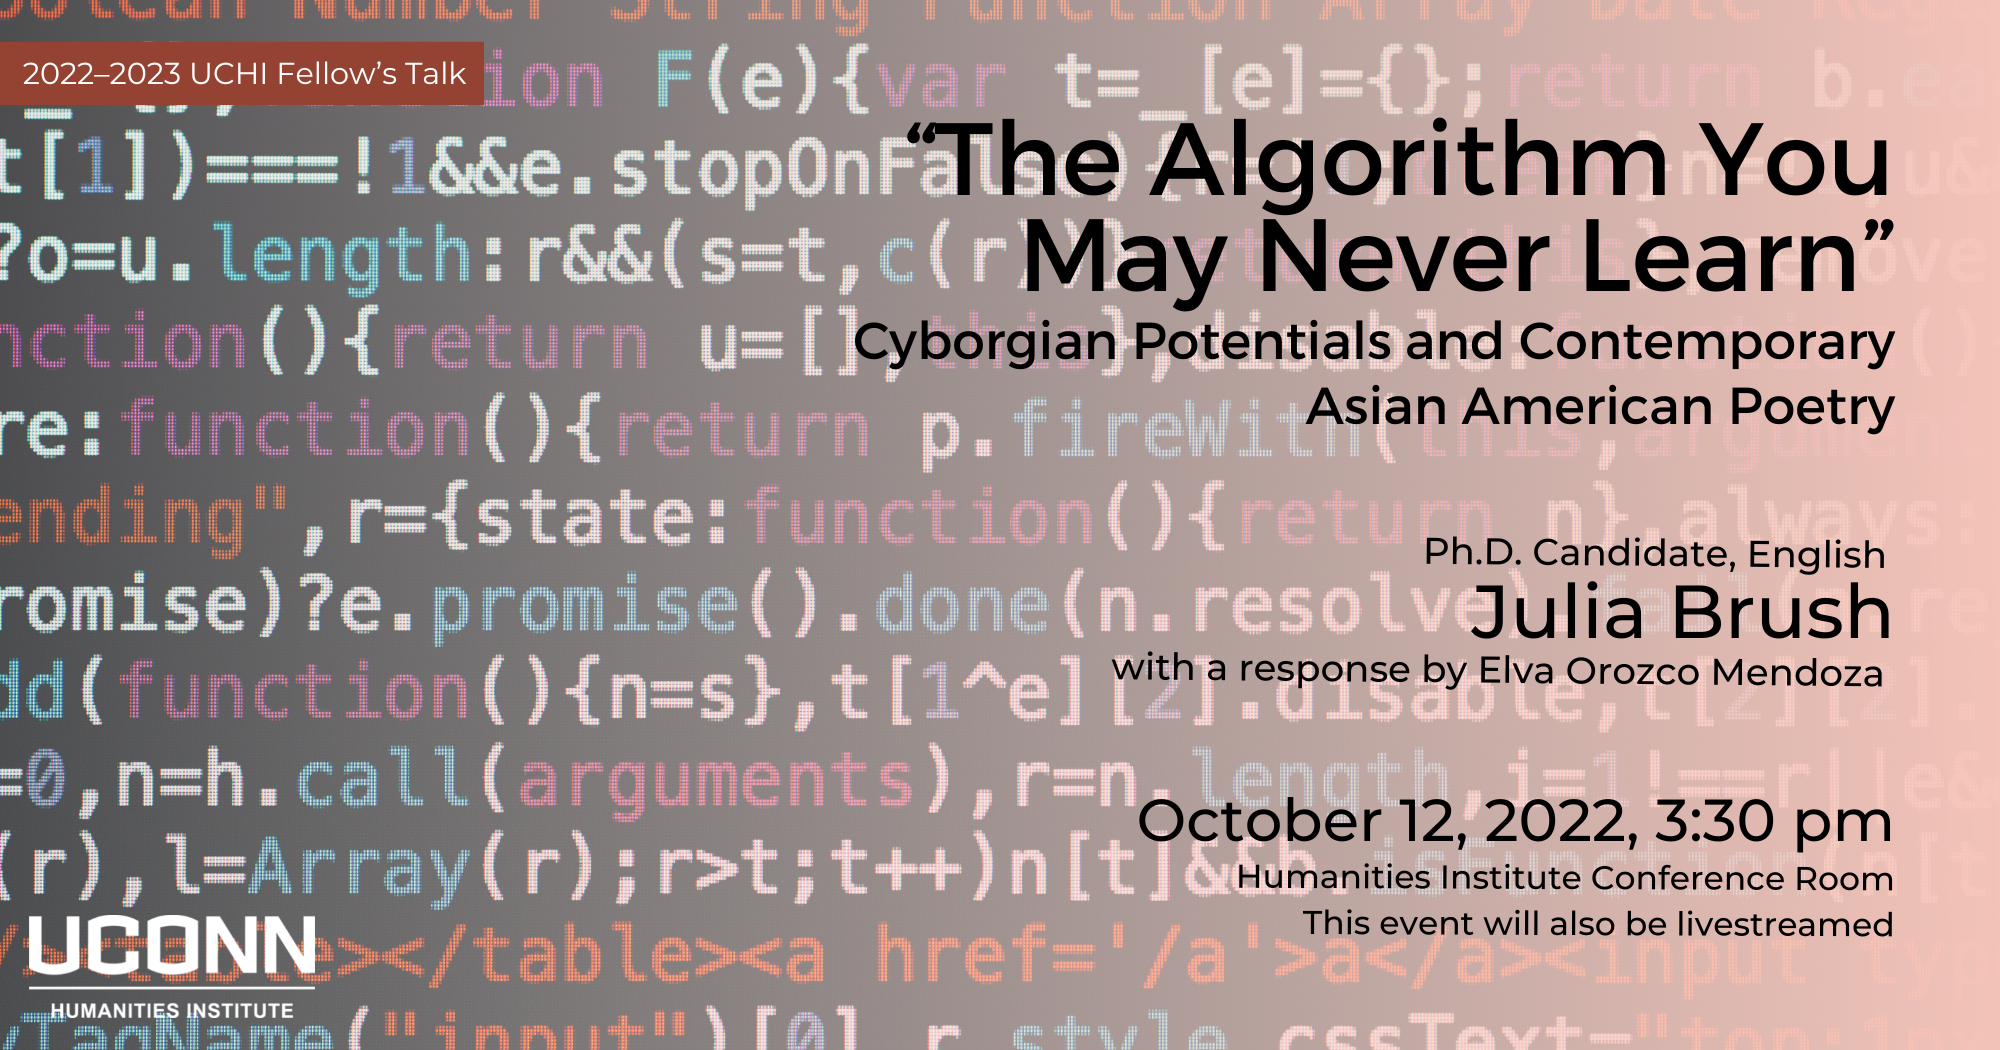 The Algorithm You May Never Learn: Cyborgian Potentials and Contemporary Asian American Poetry. Ph.D. Candidate, English, Julia Brush, with a response by Evla Orozco Mendoza. October 12, 2022, 3:30pm, Humanities Institute Conference Room. This even will also be livestreamed.